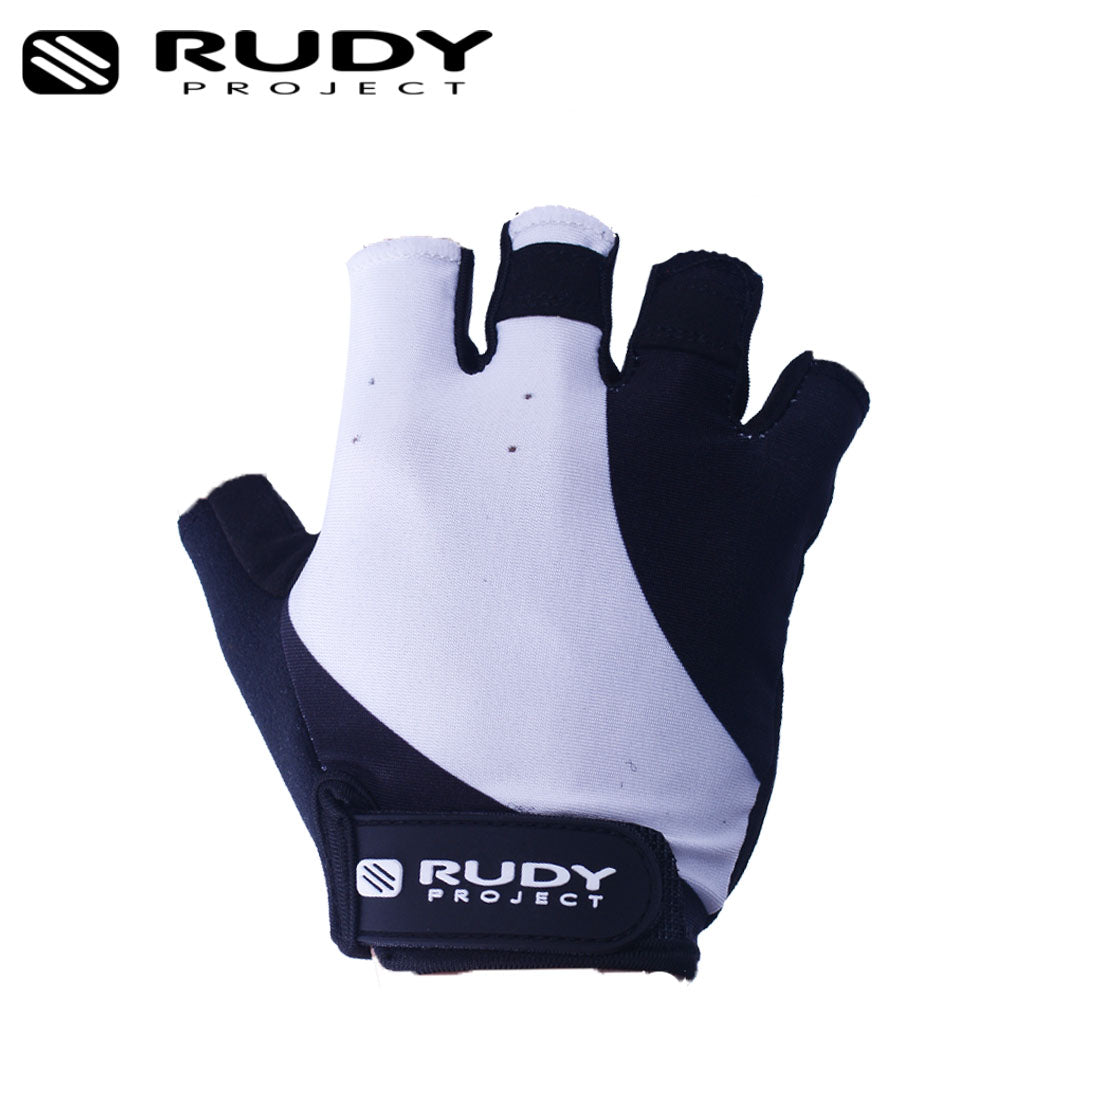 Rudy Project NEW Bike Gloves in Black & White for Cycling Sports